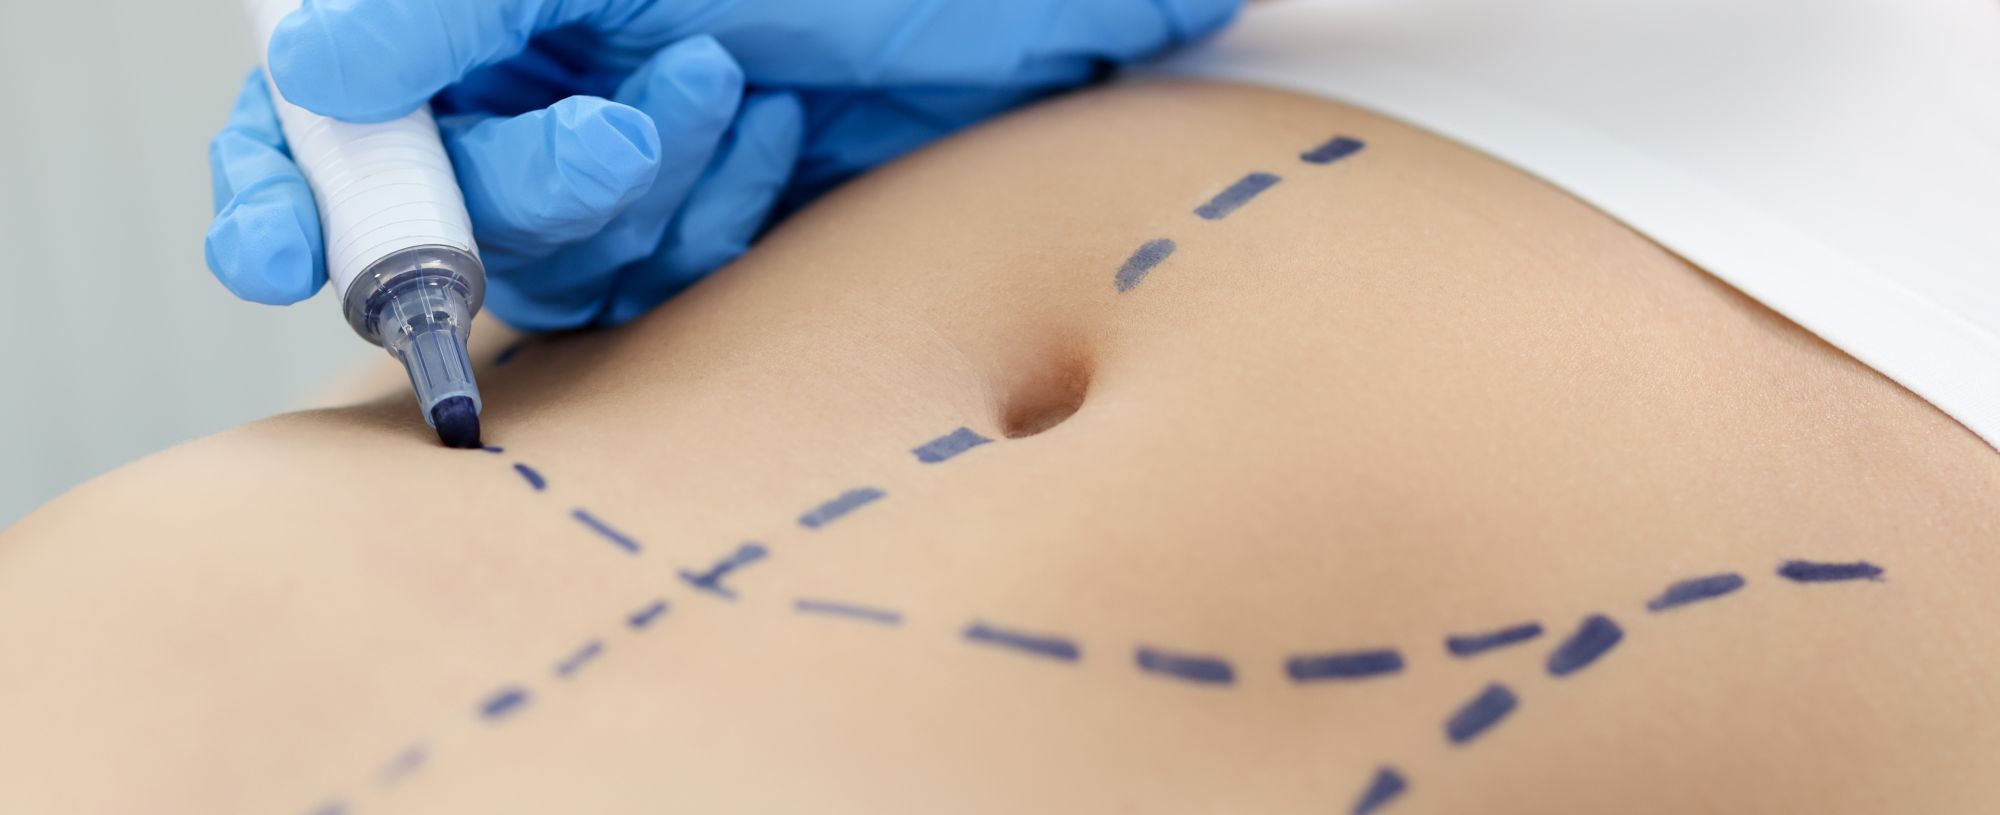 A surgeon drawing preoperative marking before abdominal wall reconstruction for a patient who suffered abdomen injury at work.